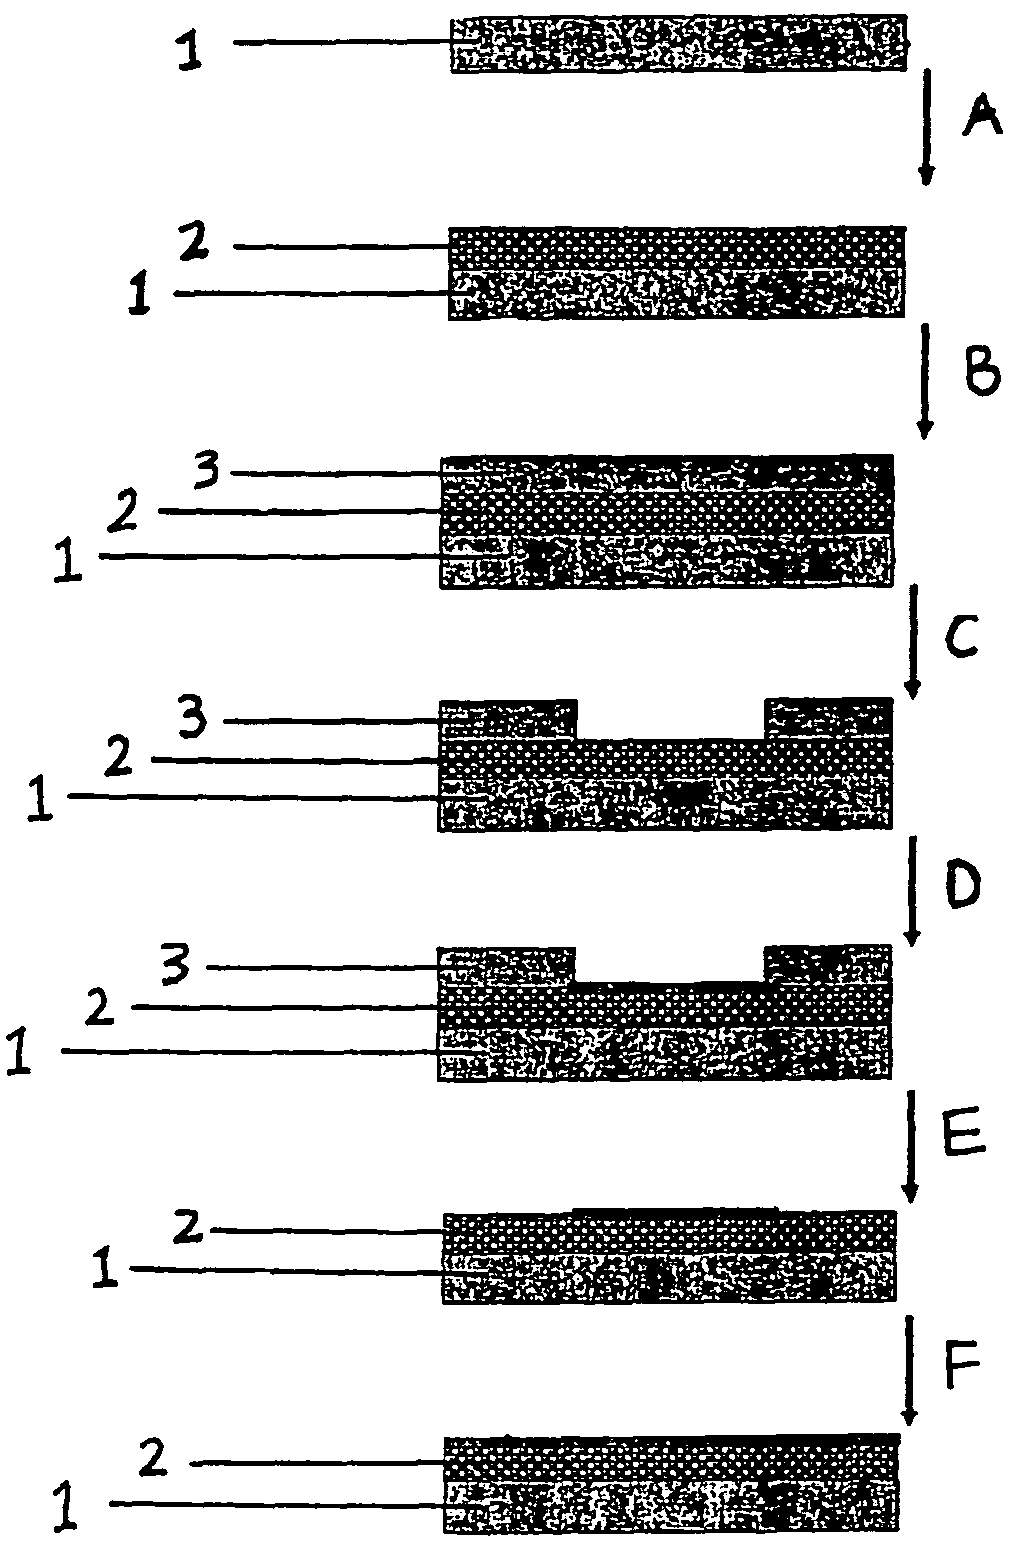 Method of producing a substrate having areas of different hydrophilicity and/or oleophilicity on the same surface